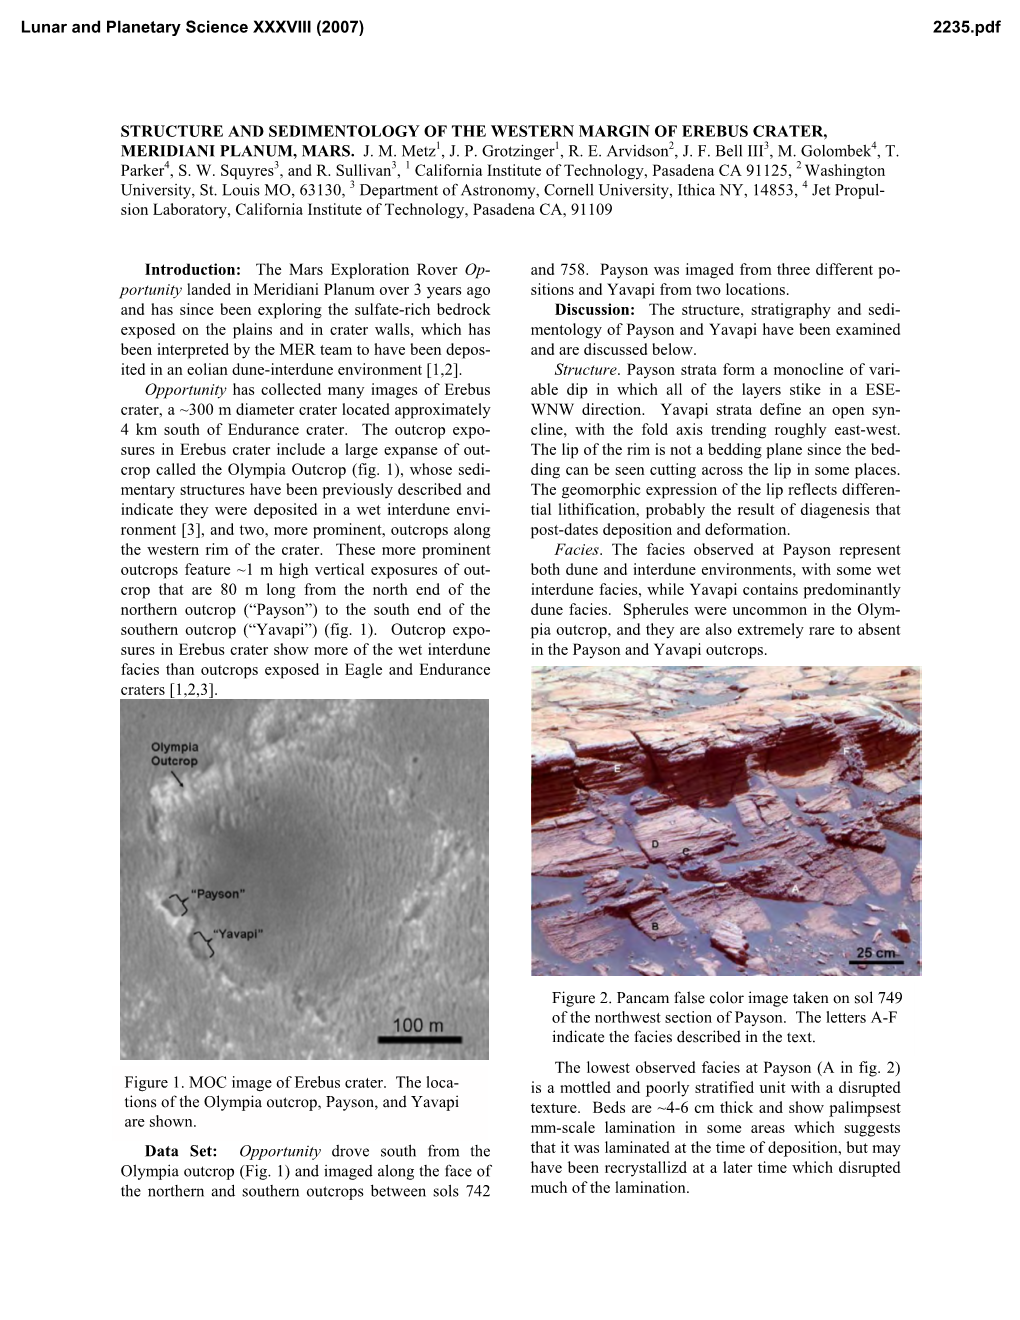 Structure and Sedimentology of the Western Margin of Erebus Crater, Meridiani Planum, Mars